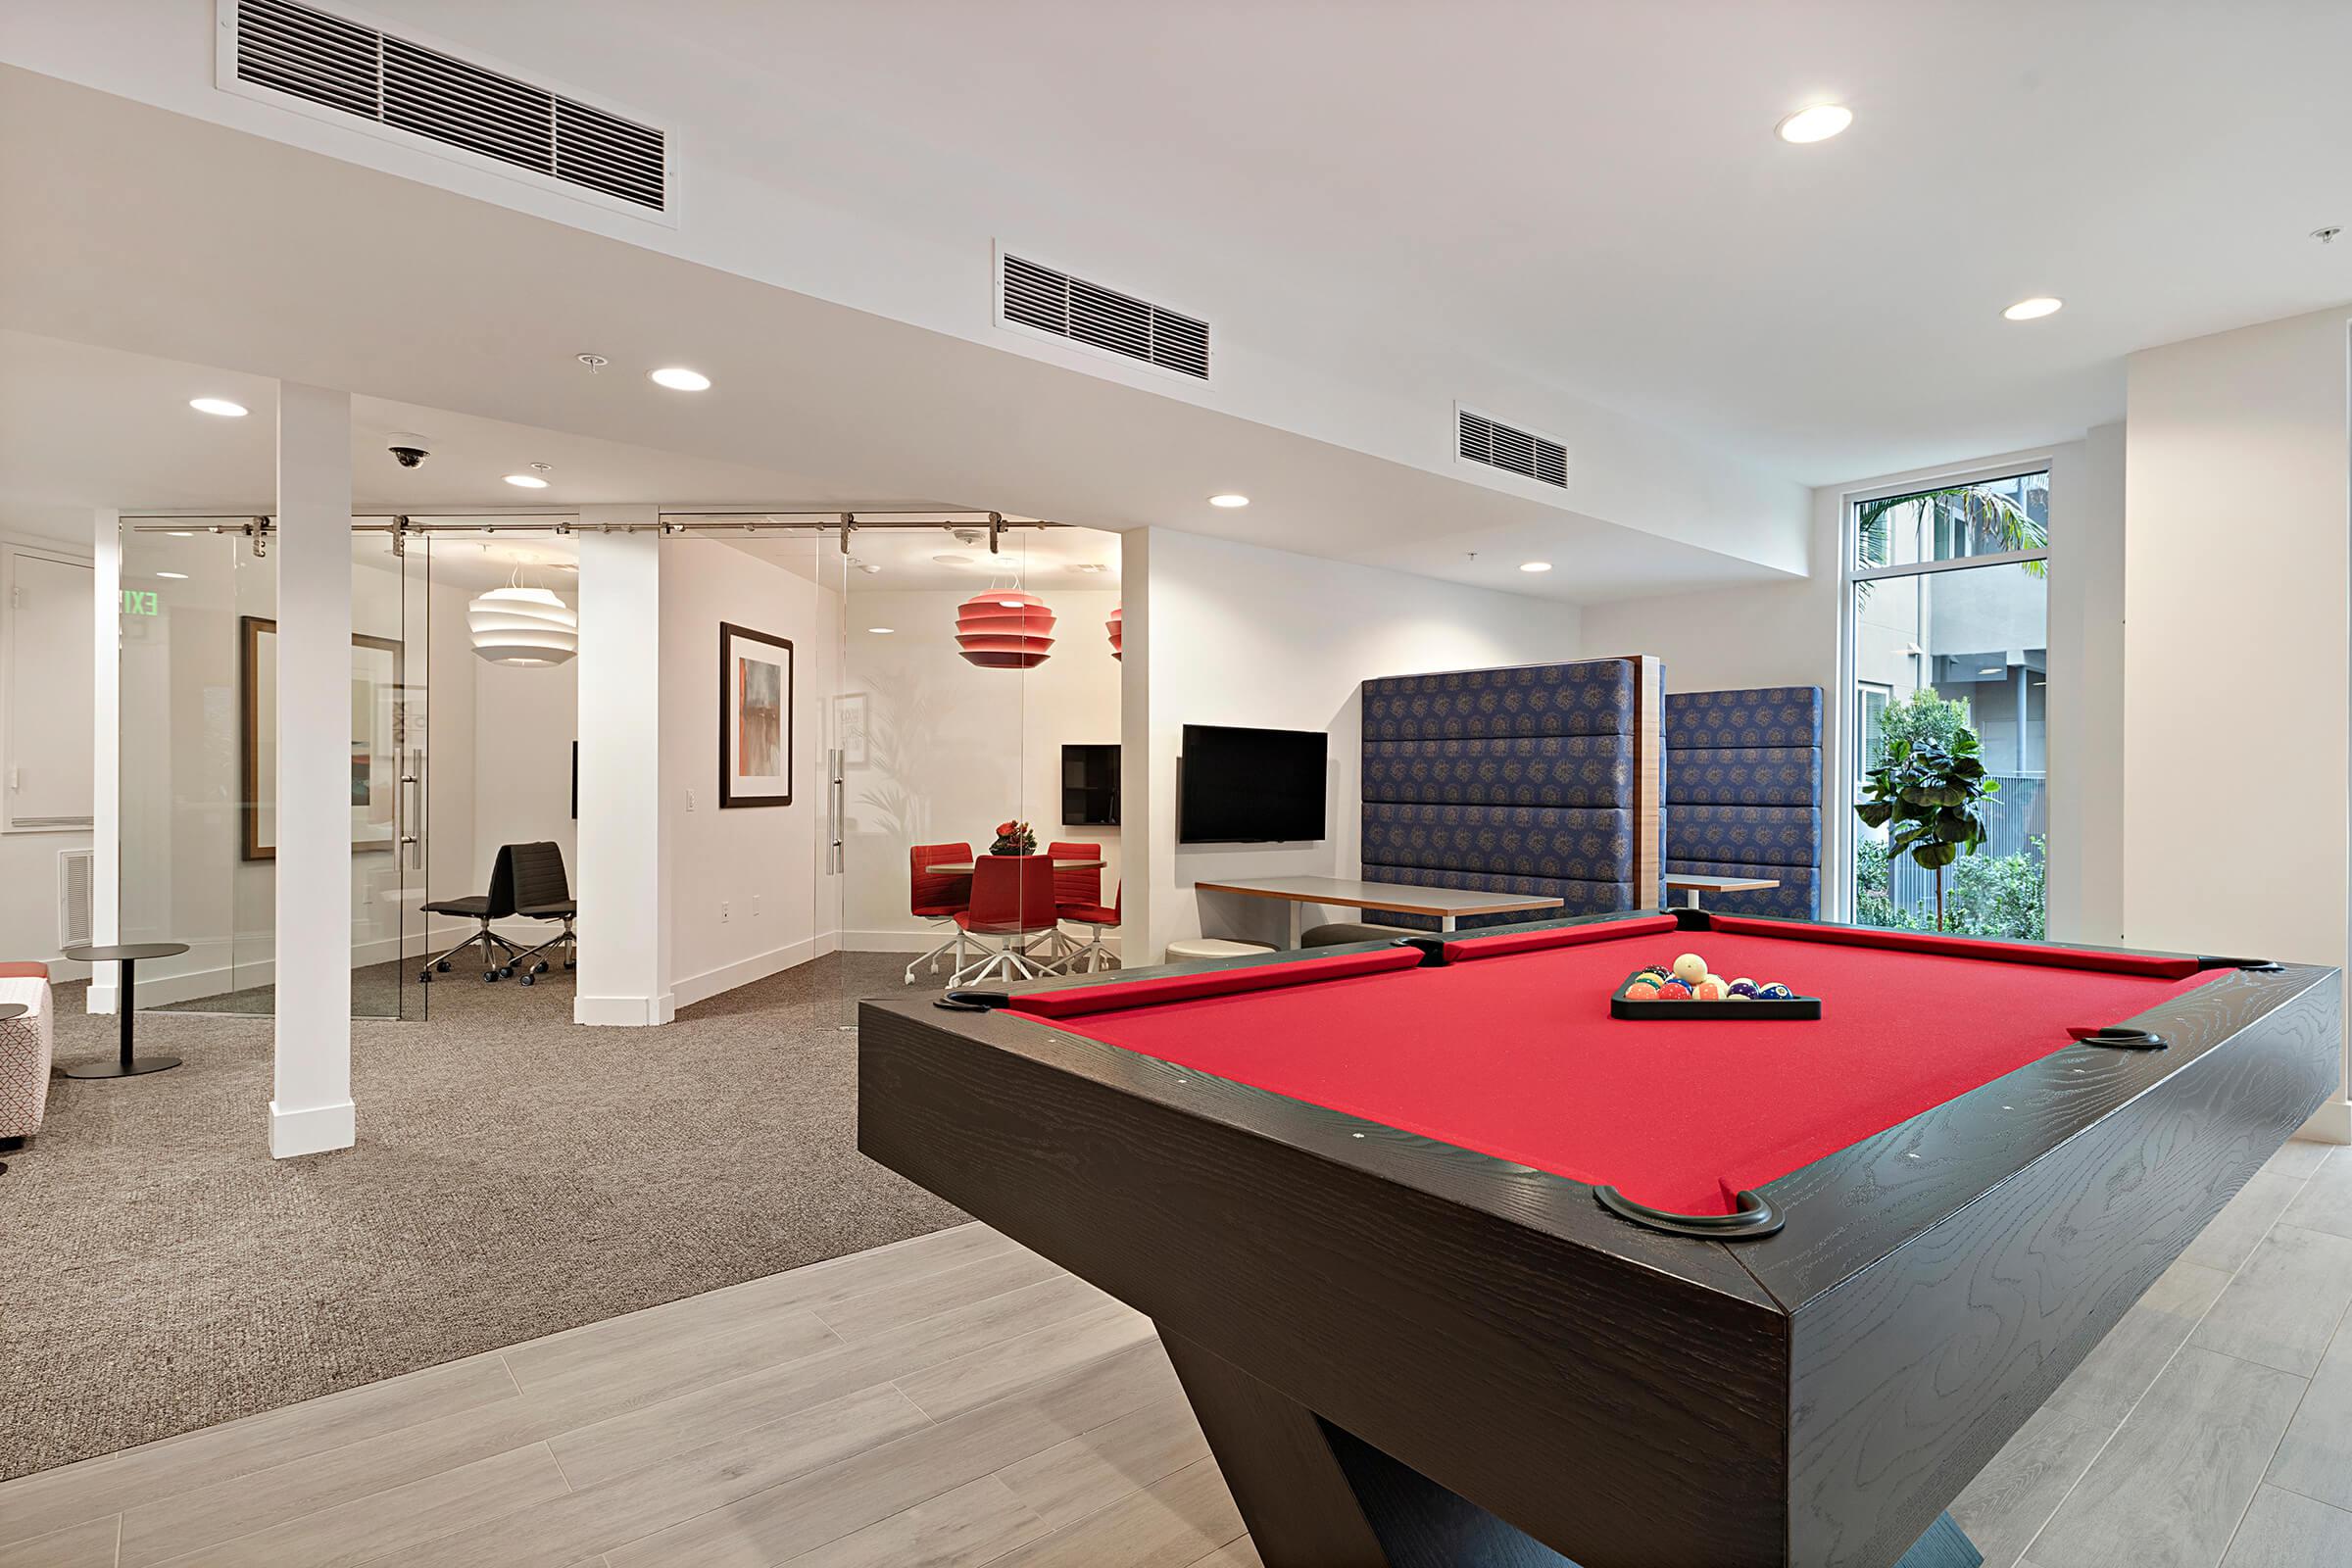 Community room with pool table